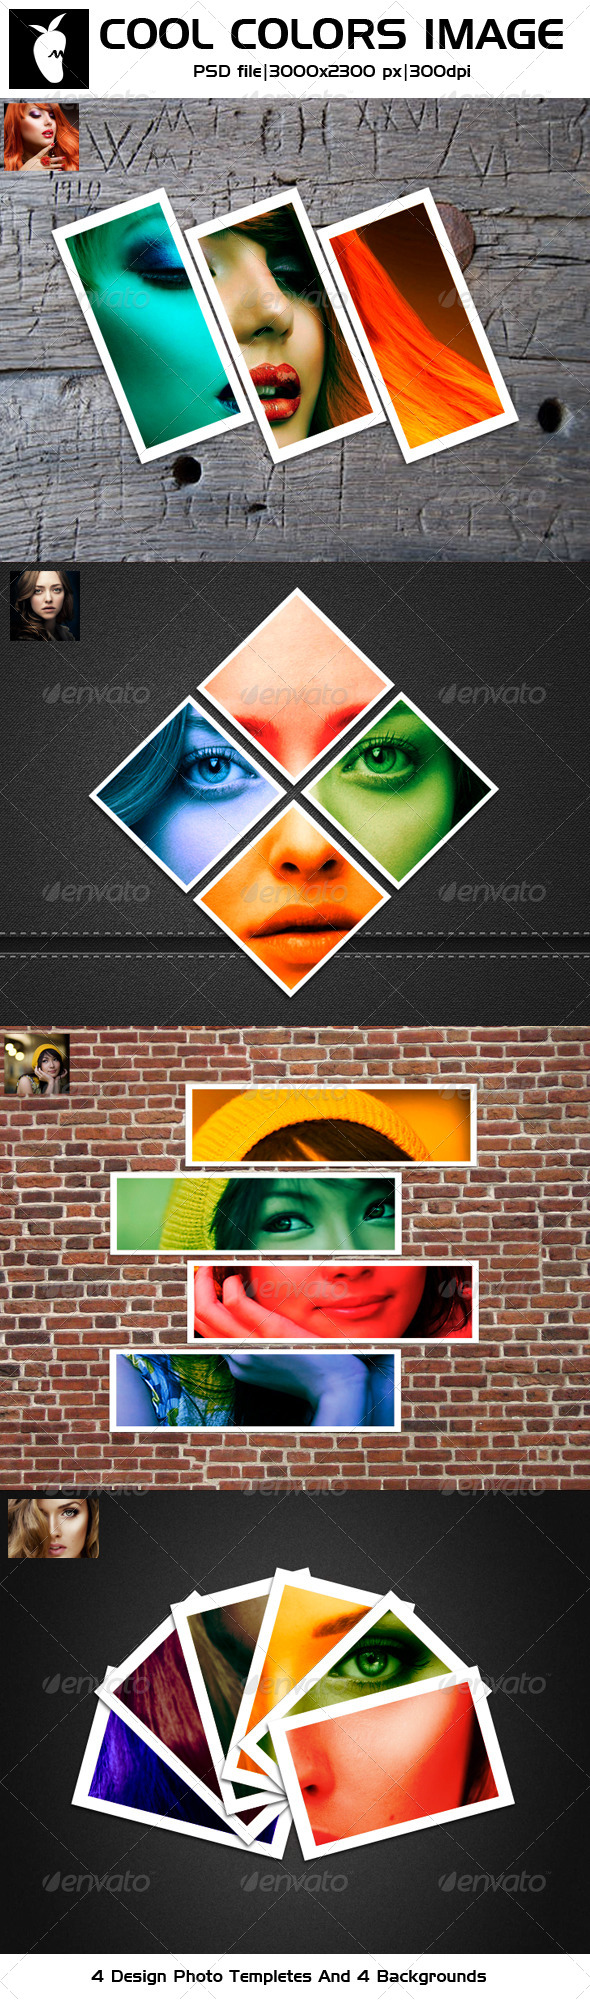 Cool Colors Image Photo Templates